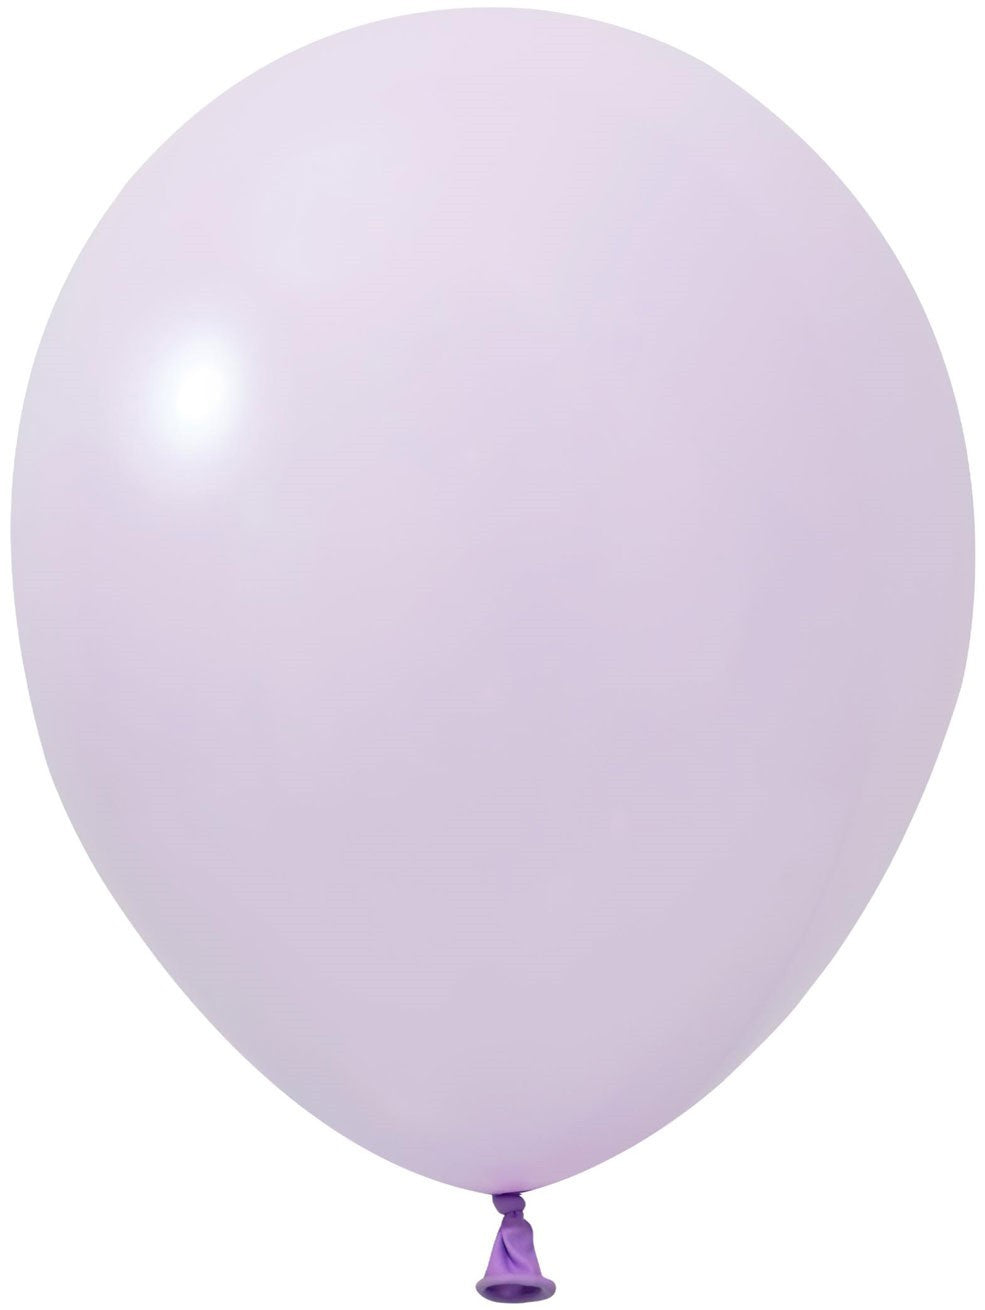 View Macaron Lilac Latex Balloon 12inch Pack of 100 information